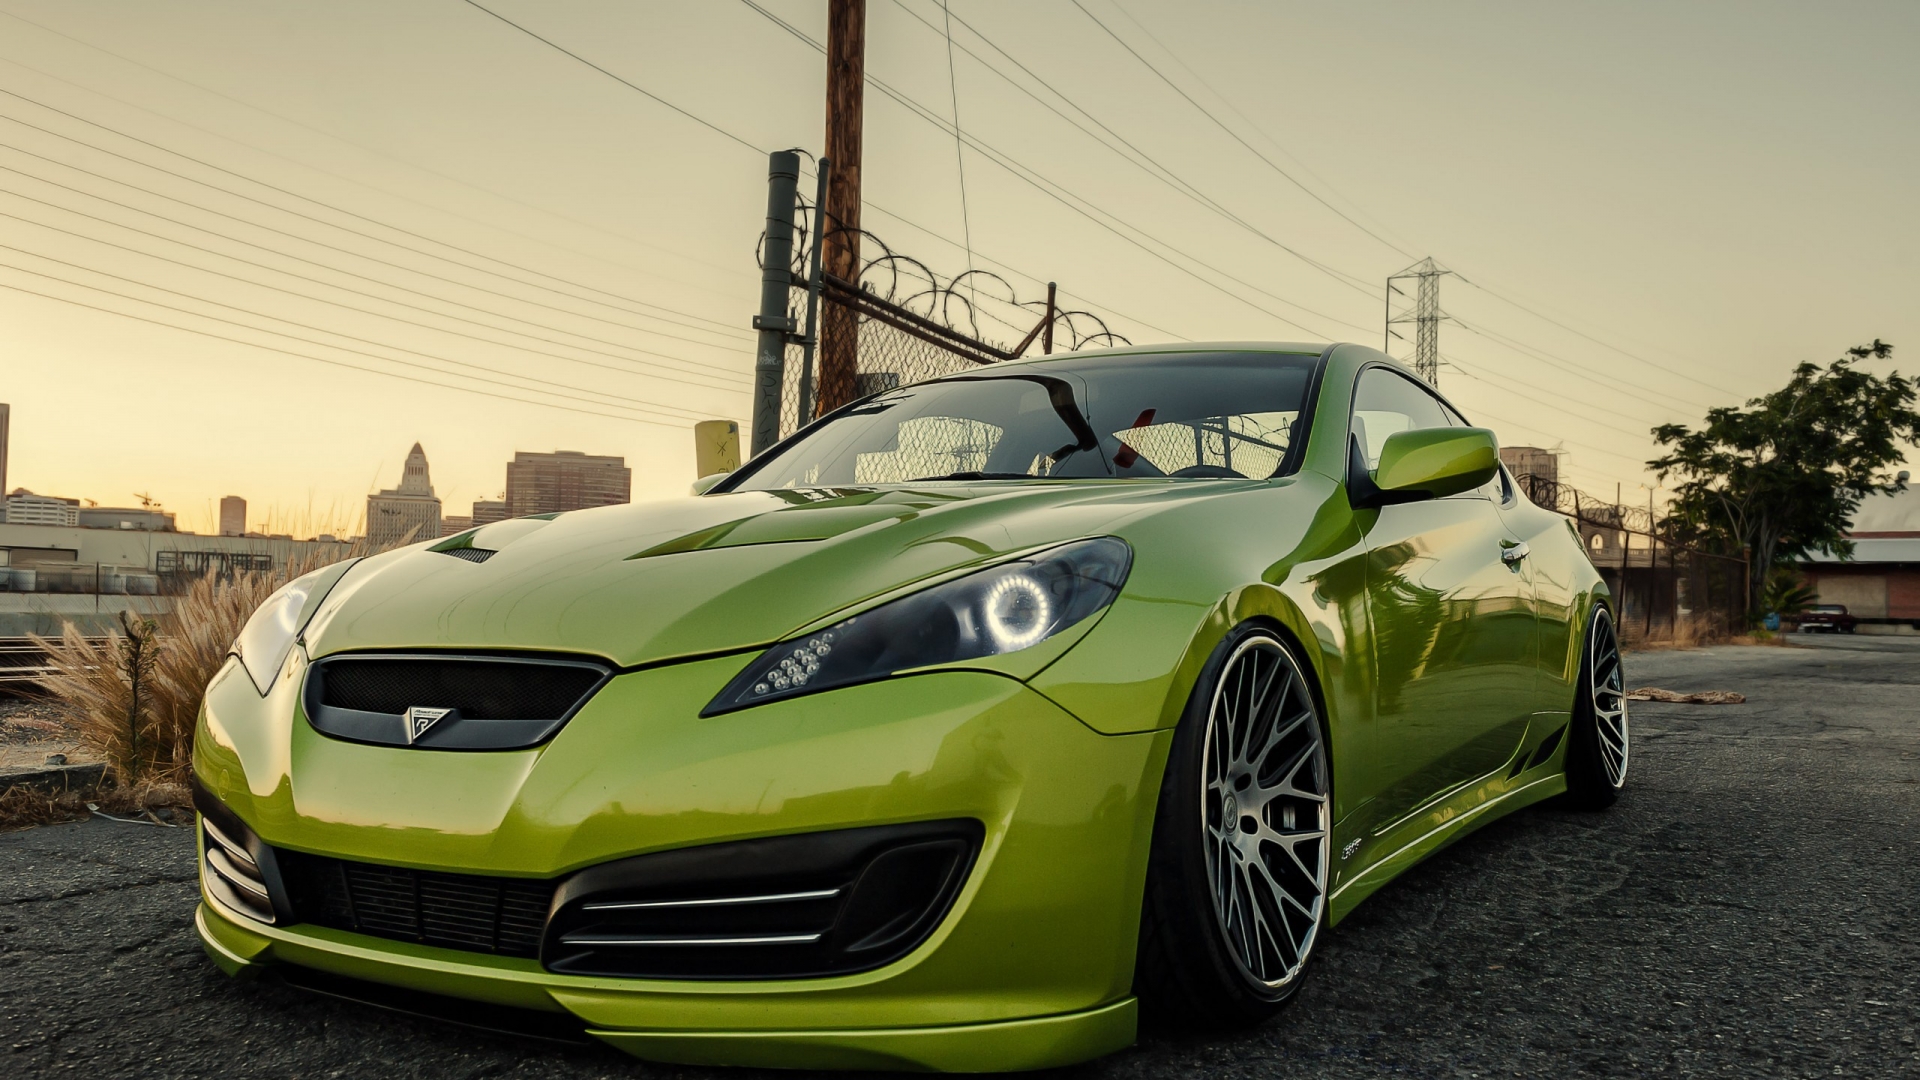 Stanced Hyundai Genesis Coupe for 1920 x 1080 HDTV 1080p resolution